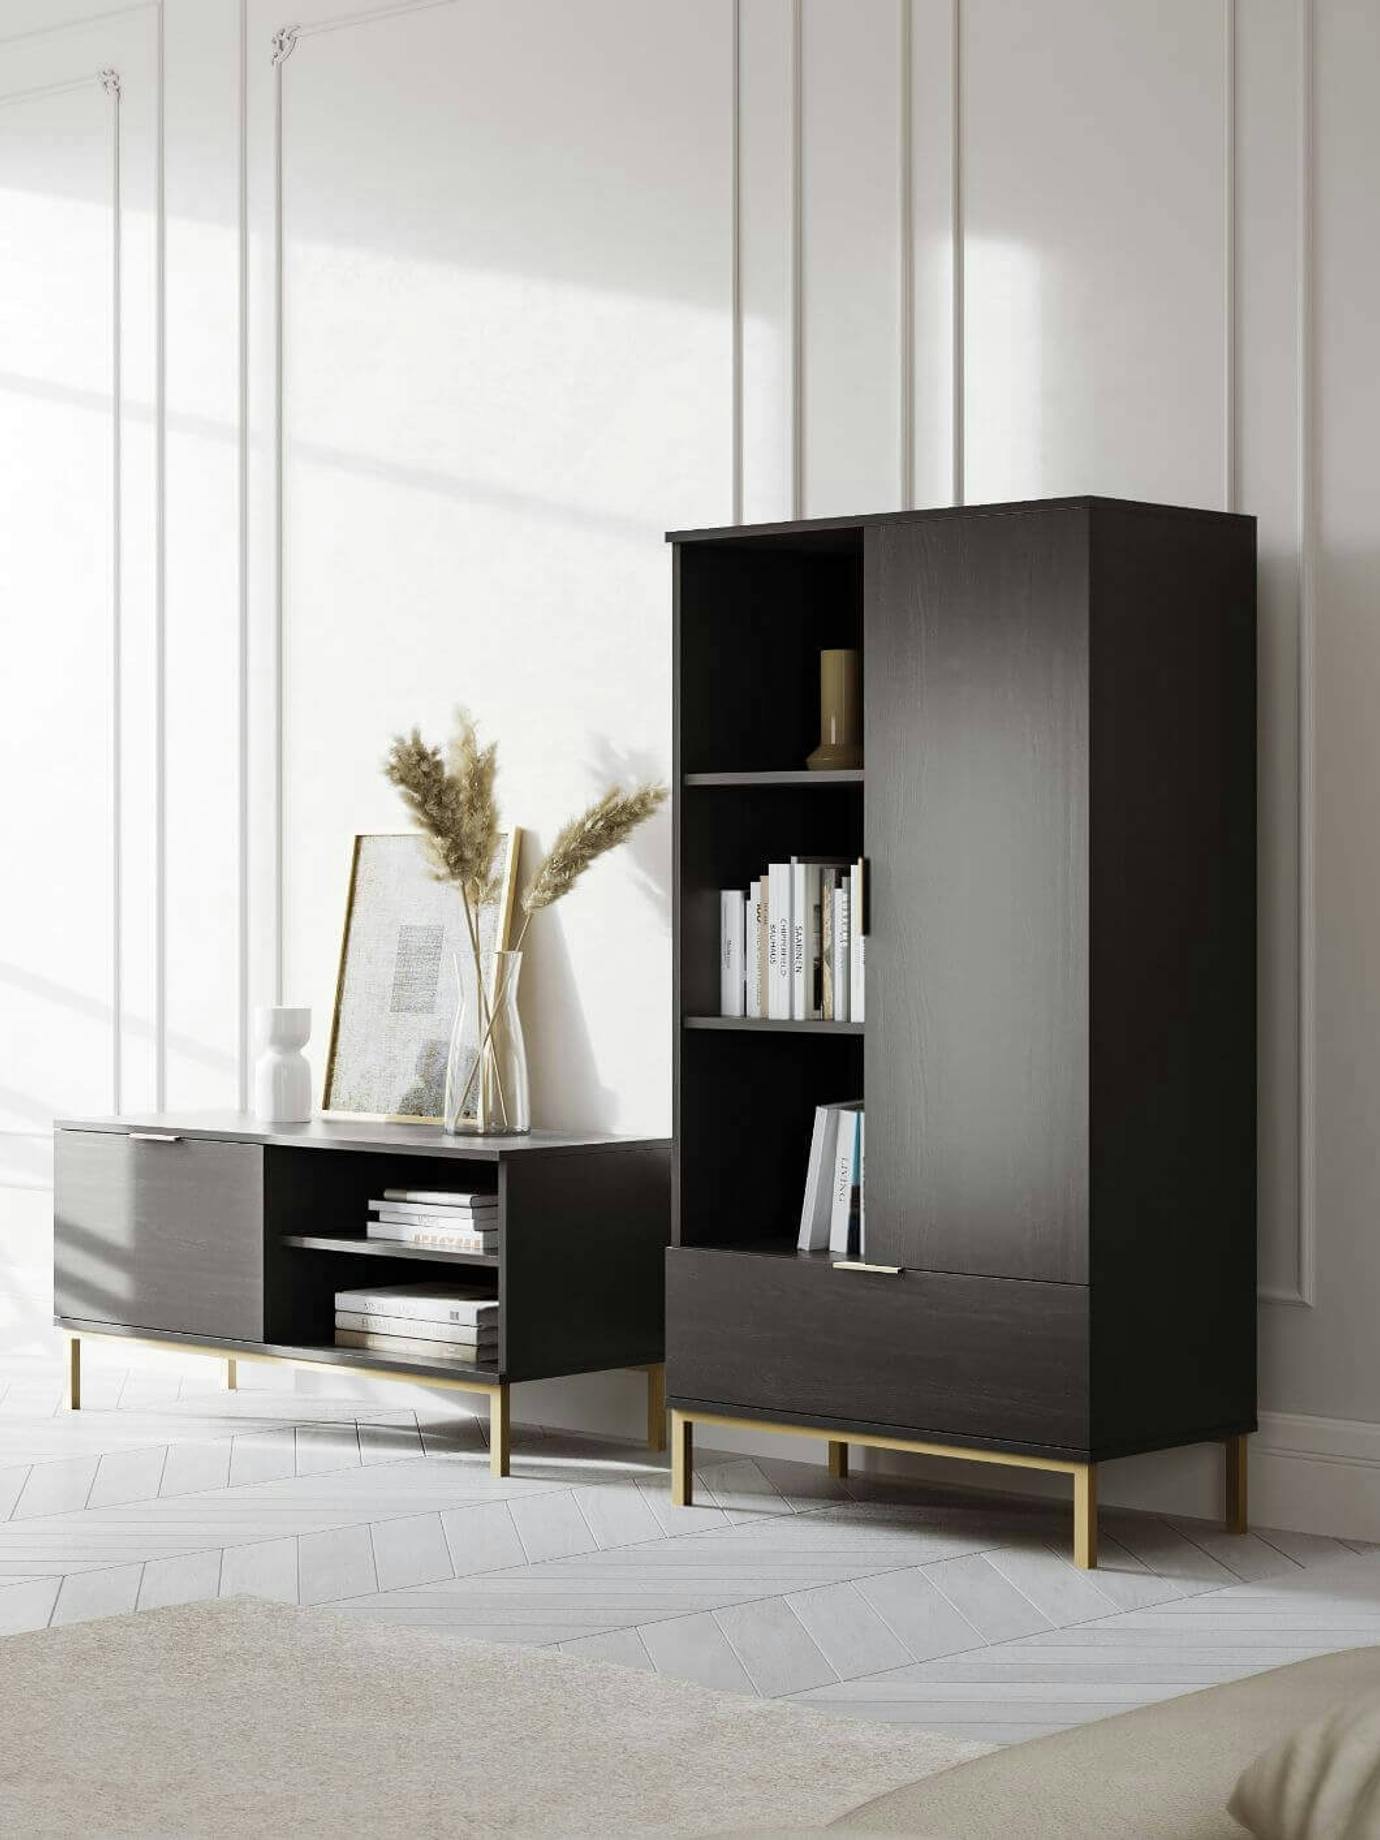 black-bookshelf-and-console-in-a-modern-living-room